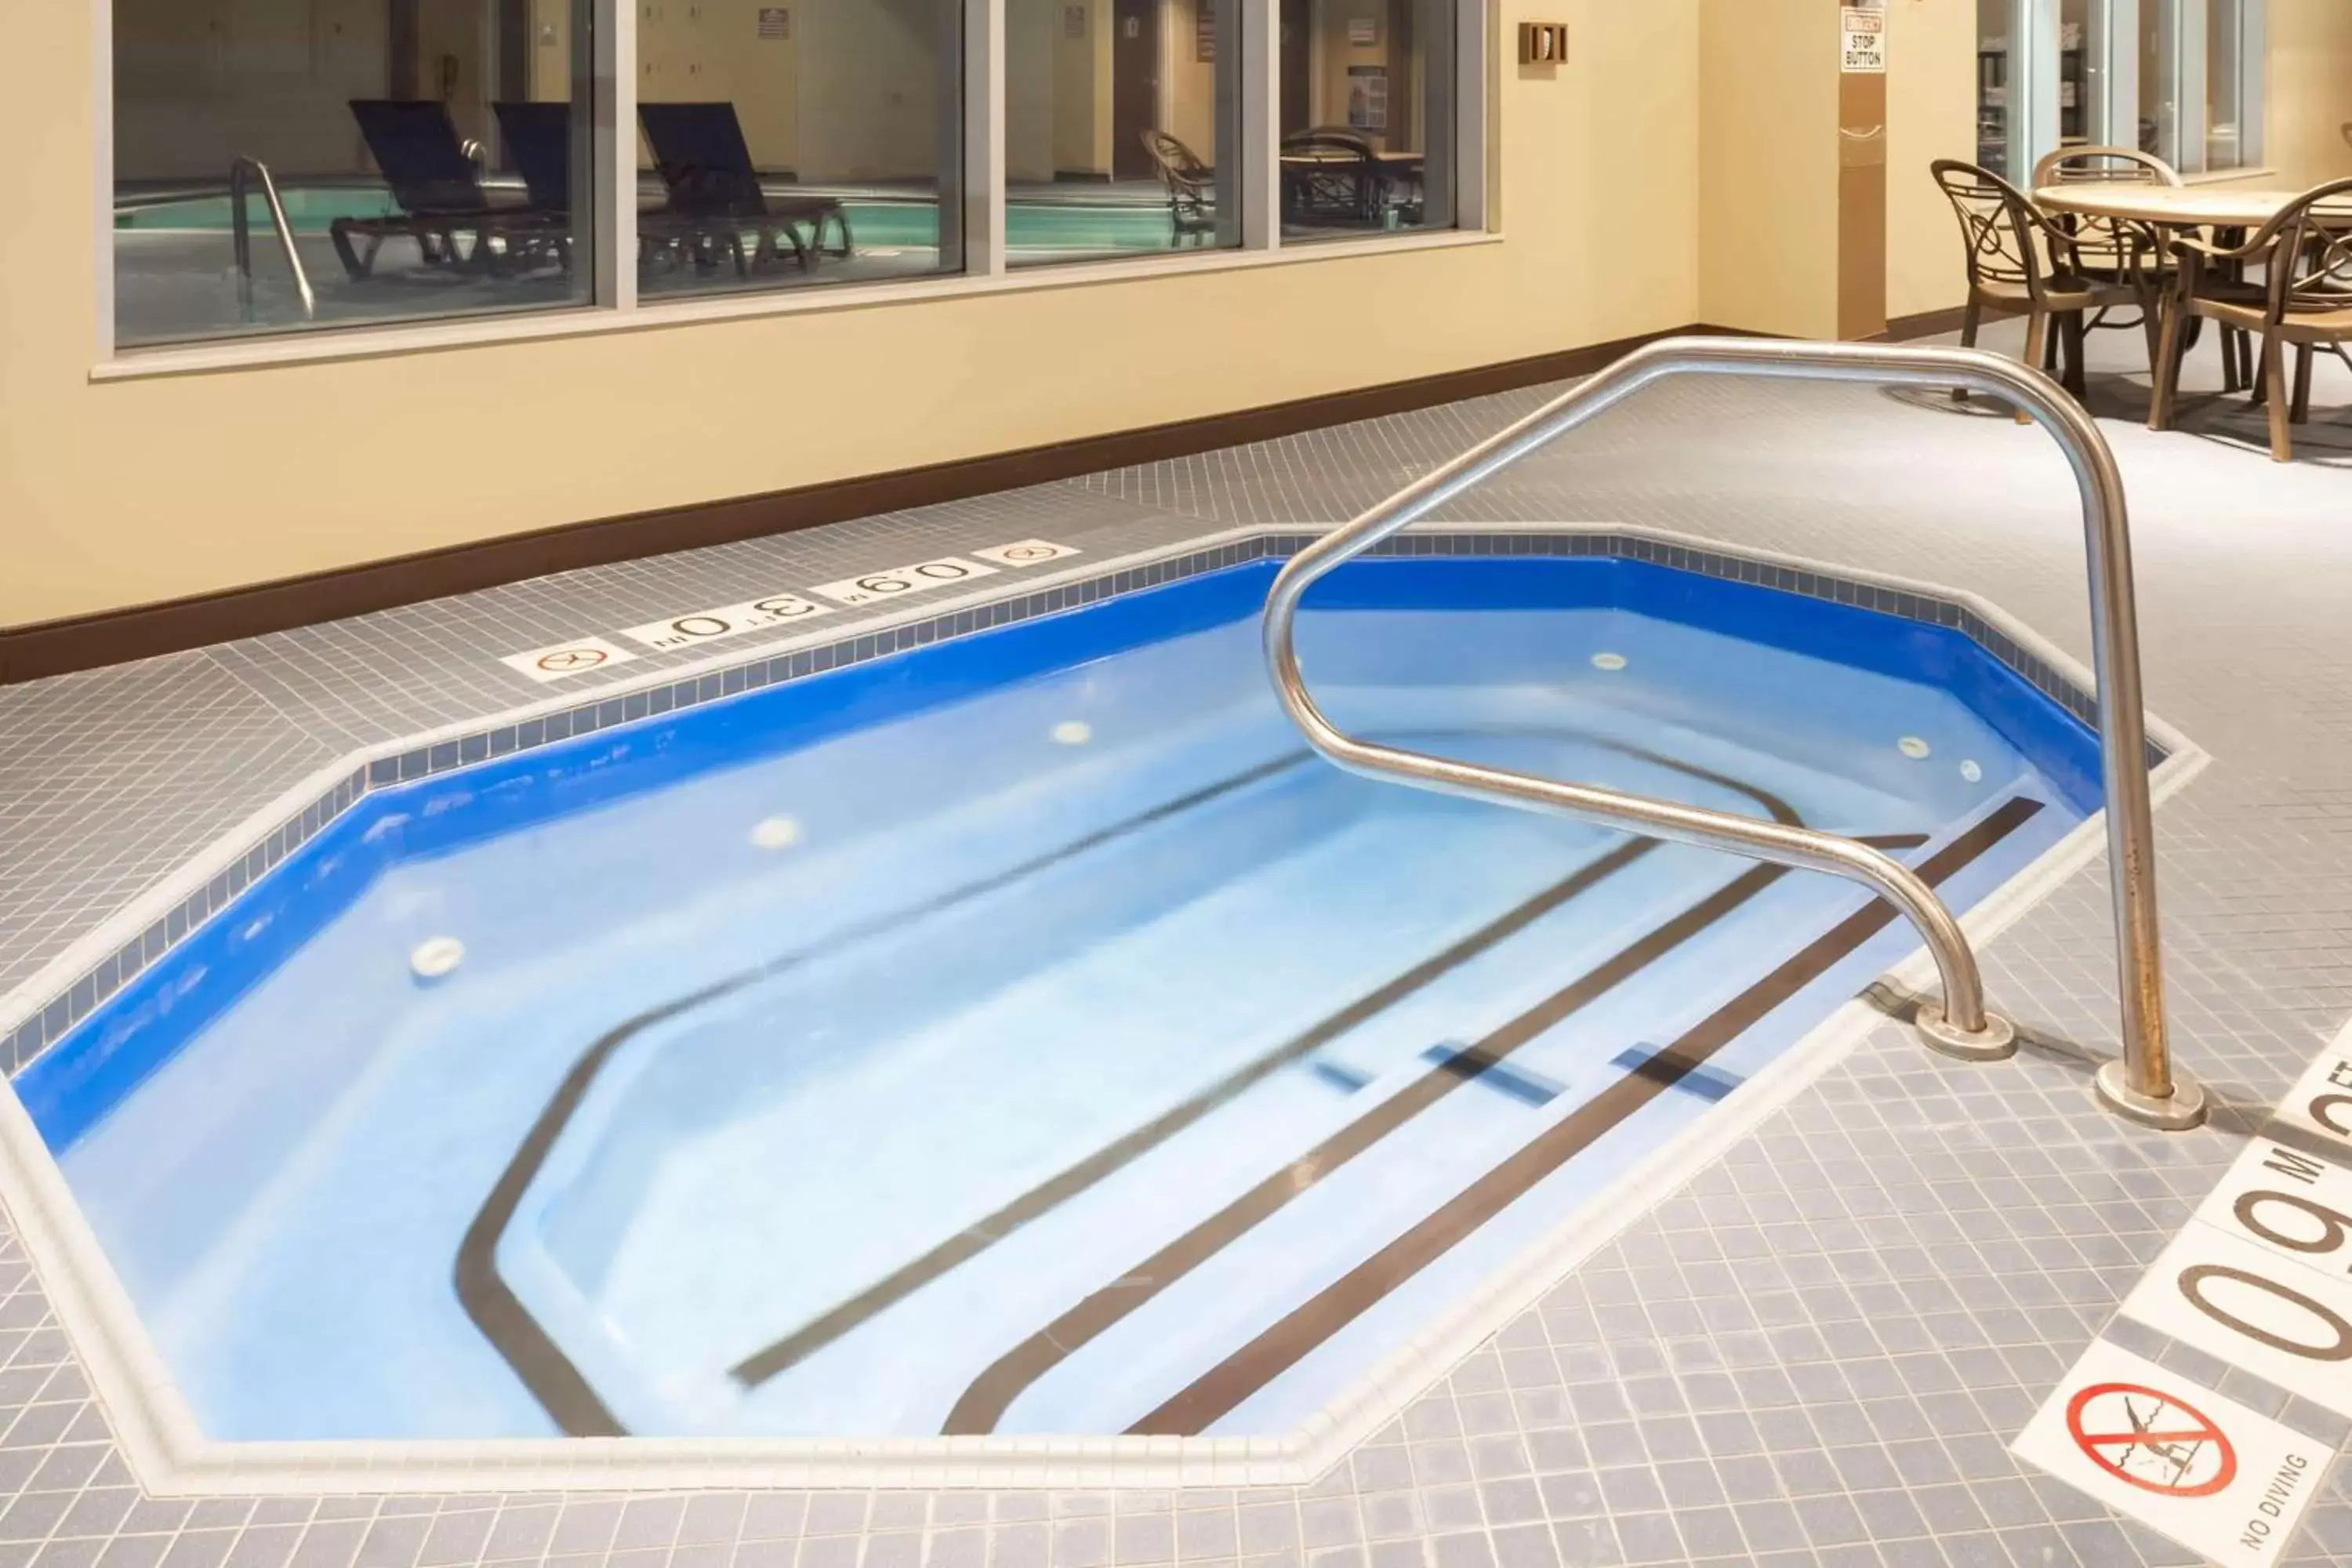 On site, Swimming Pool in Microtel Inn & Suites by Wyndham - Timmins